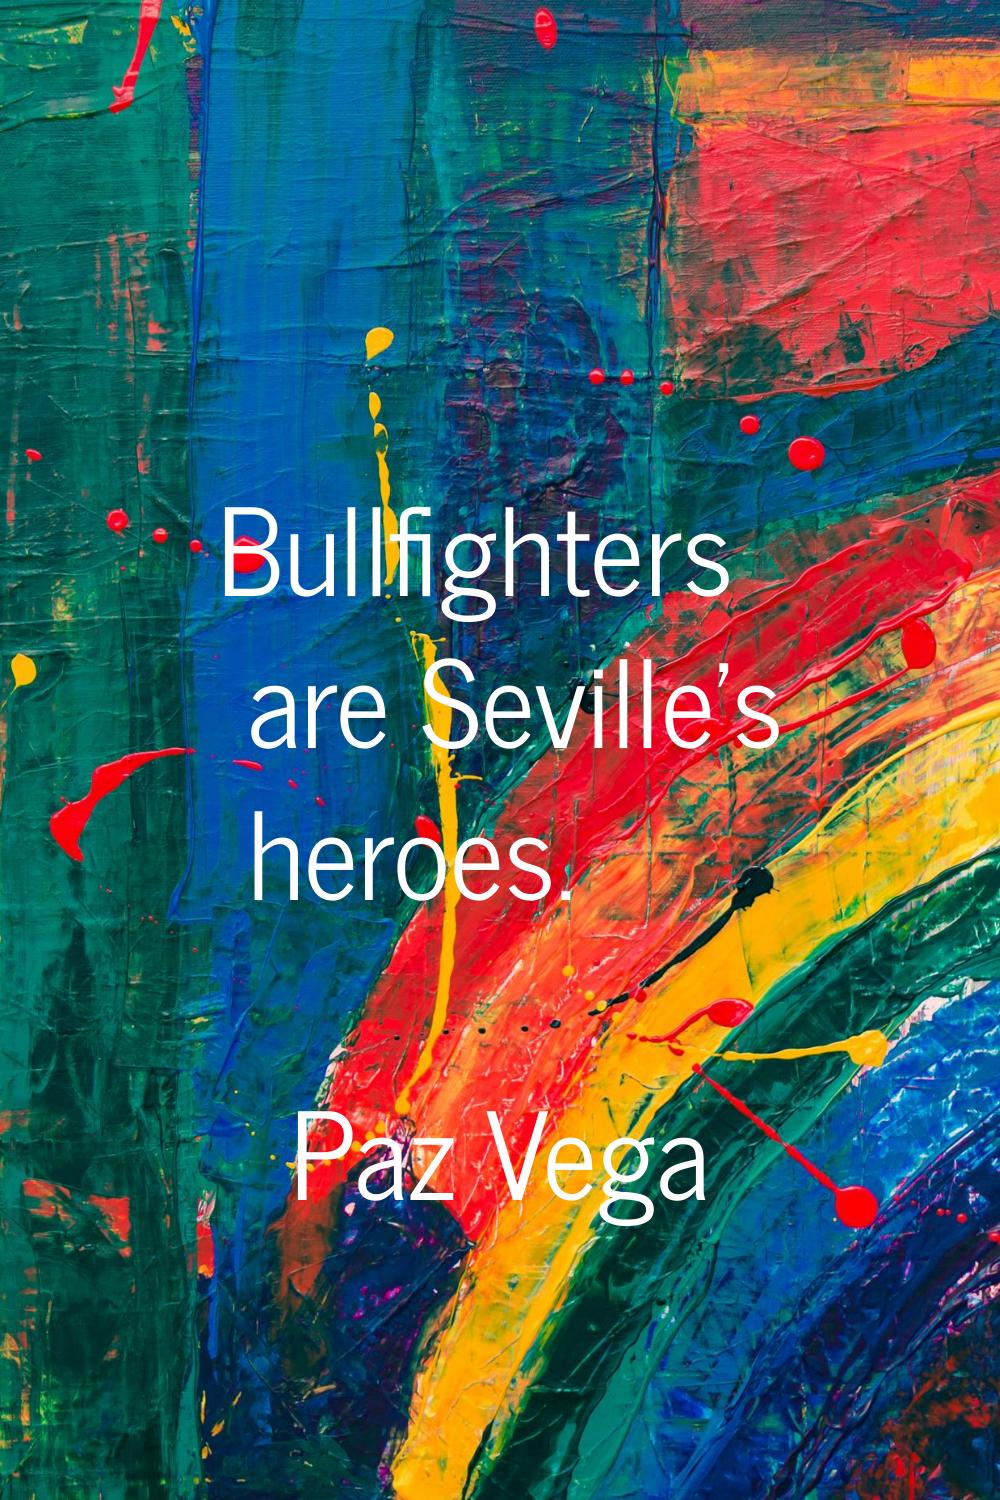 Bullfighters are Seville's heroes.